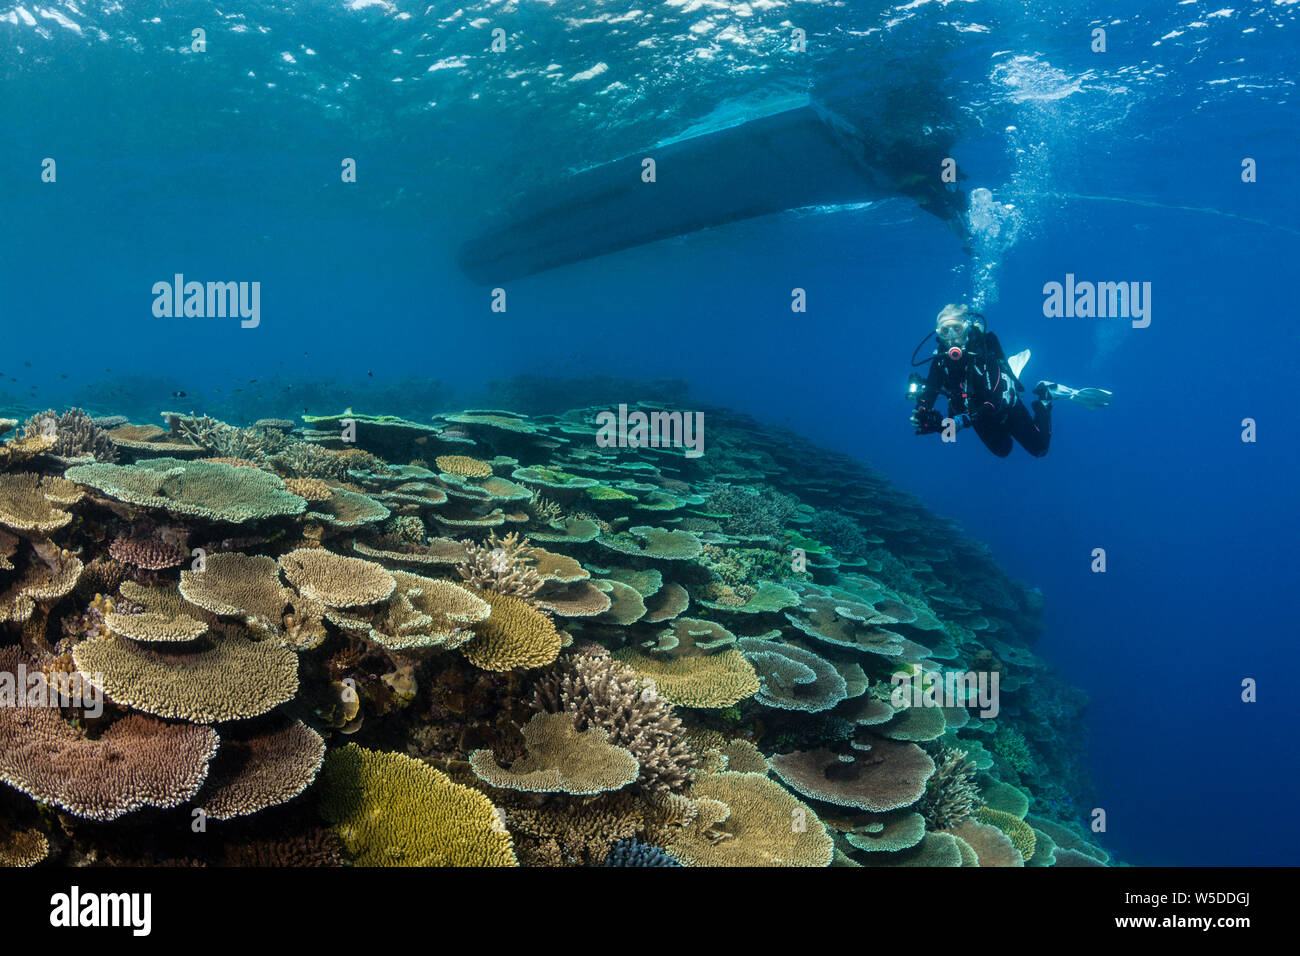 Diving in Coral Reef, Kimbe Bay, New Britain, Papua New Guinea Stock Photo